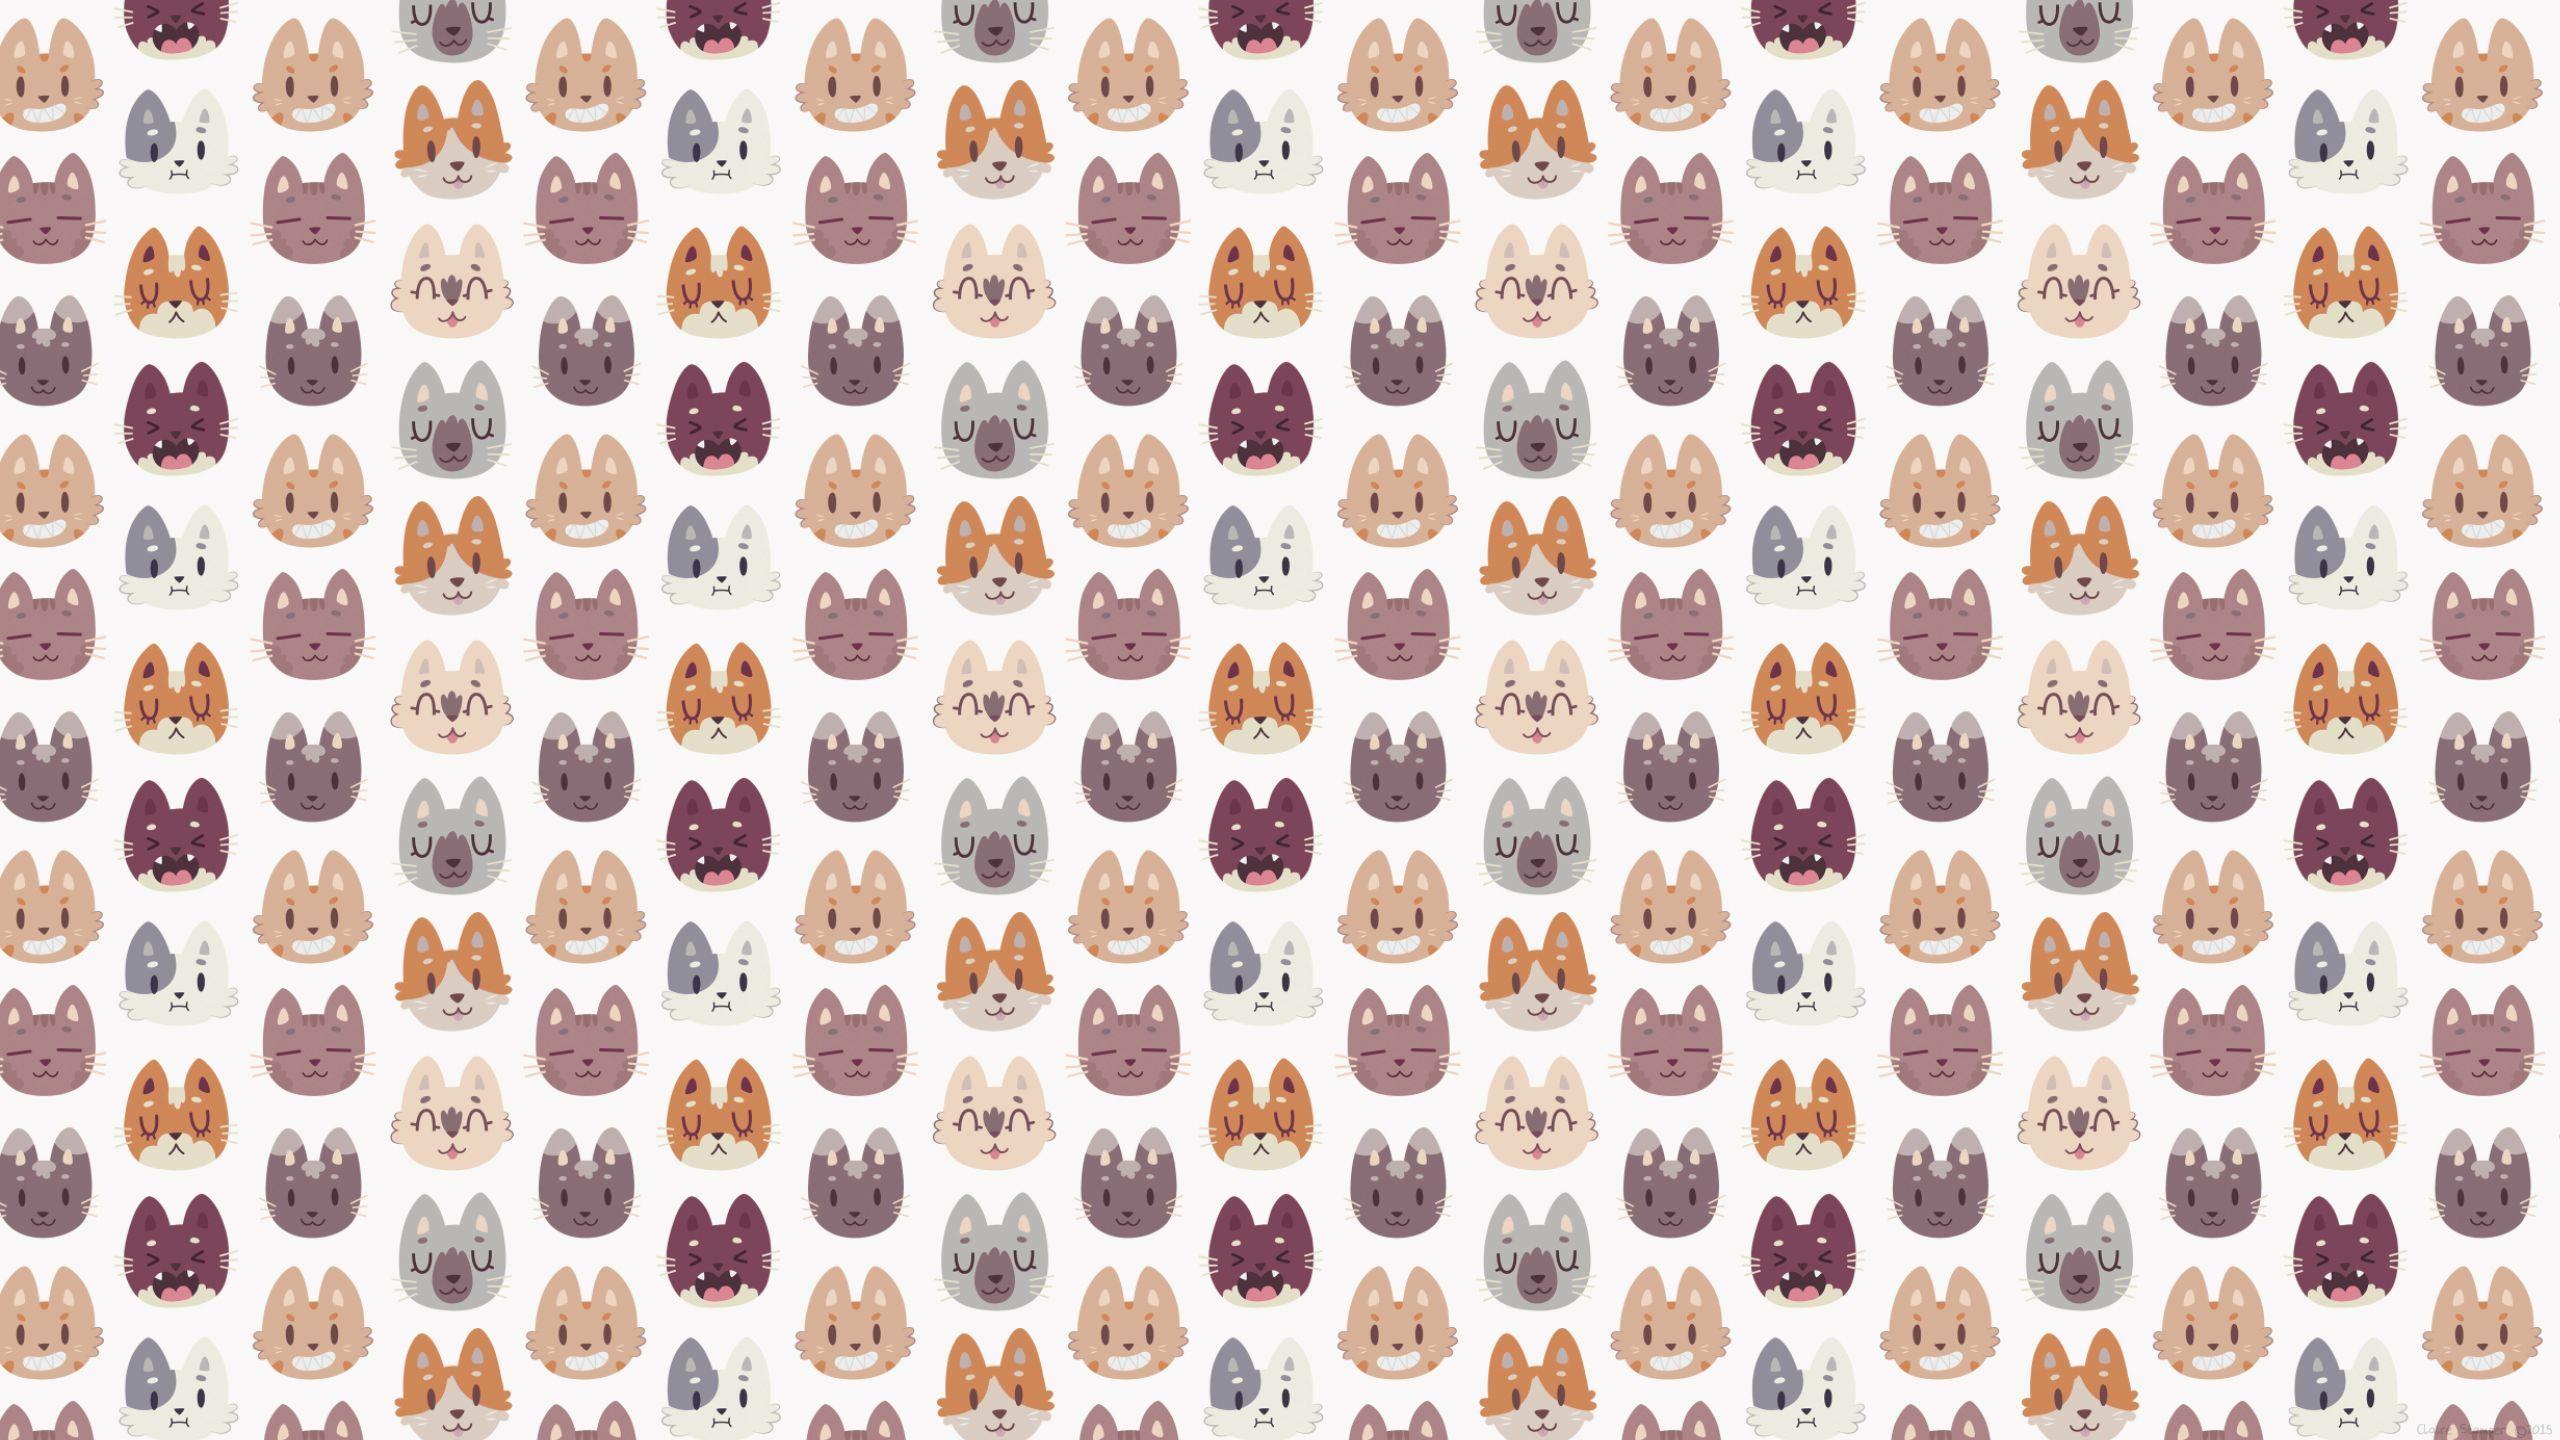 Kitty Cat Faces Pattern [2560x1440]